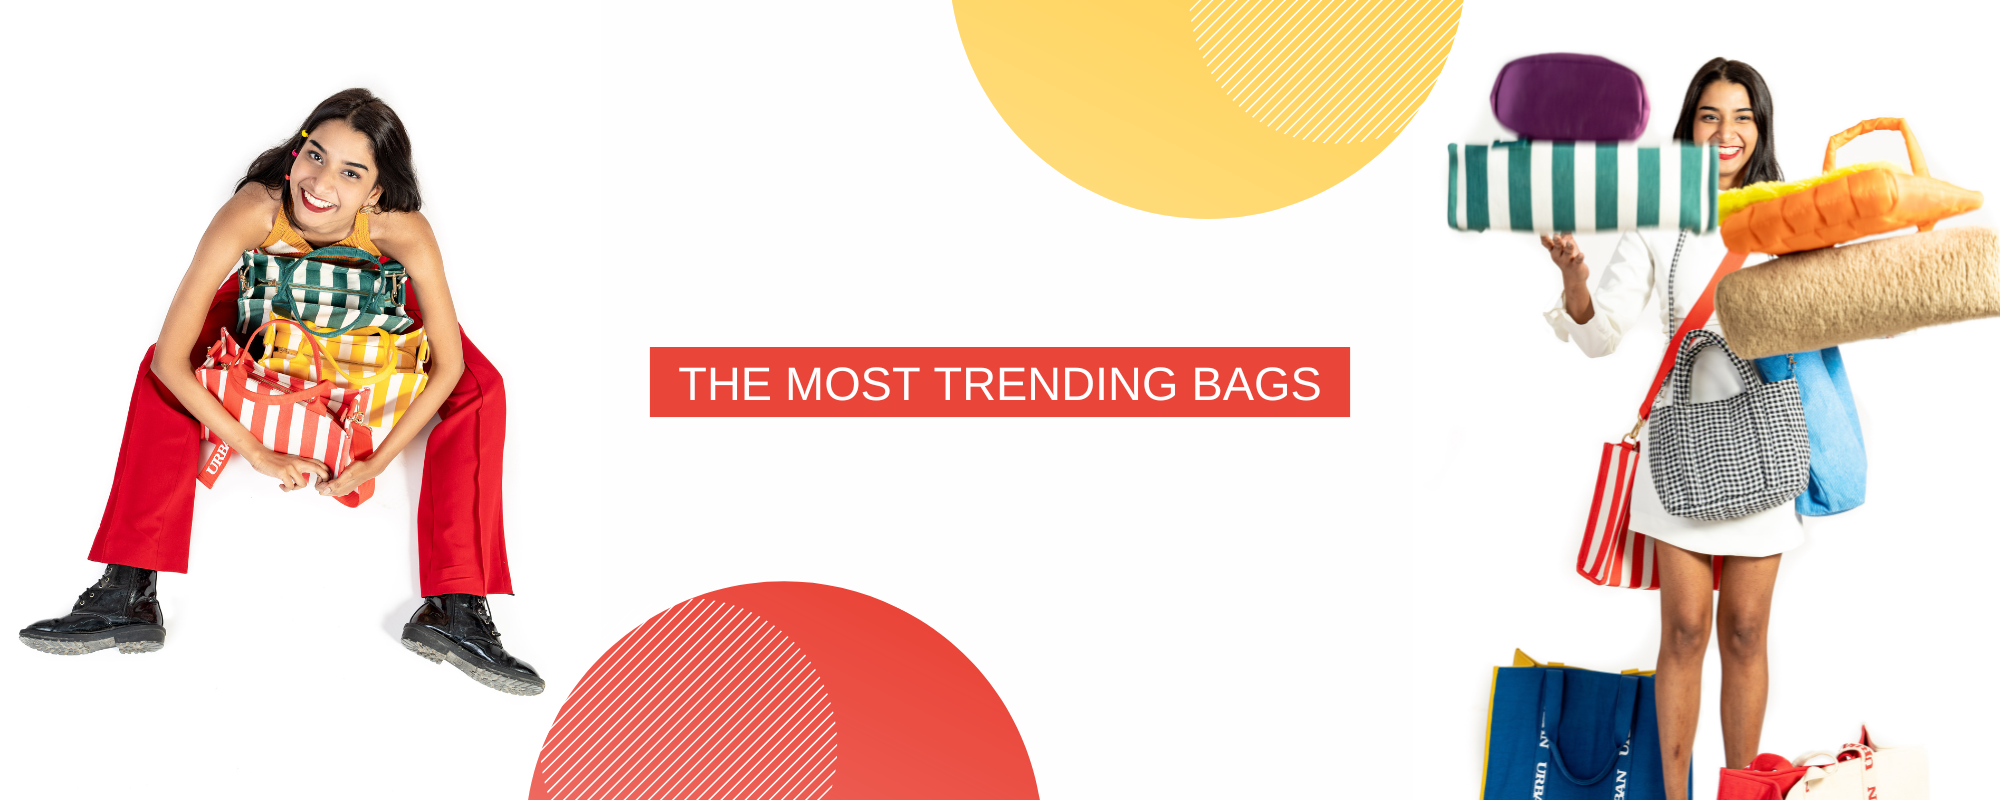 The most trending bags of 2022